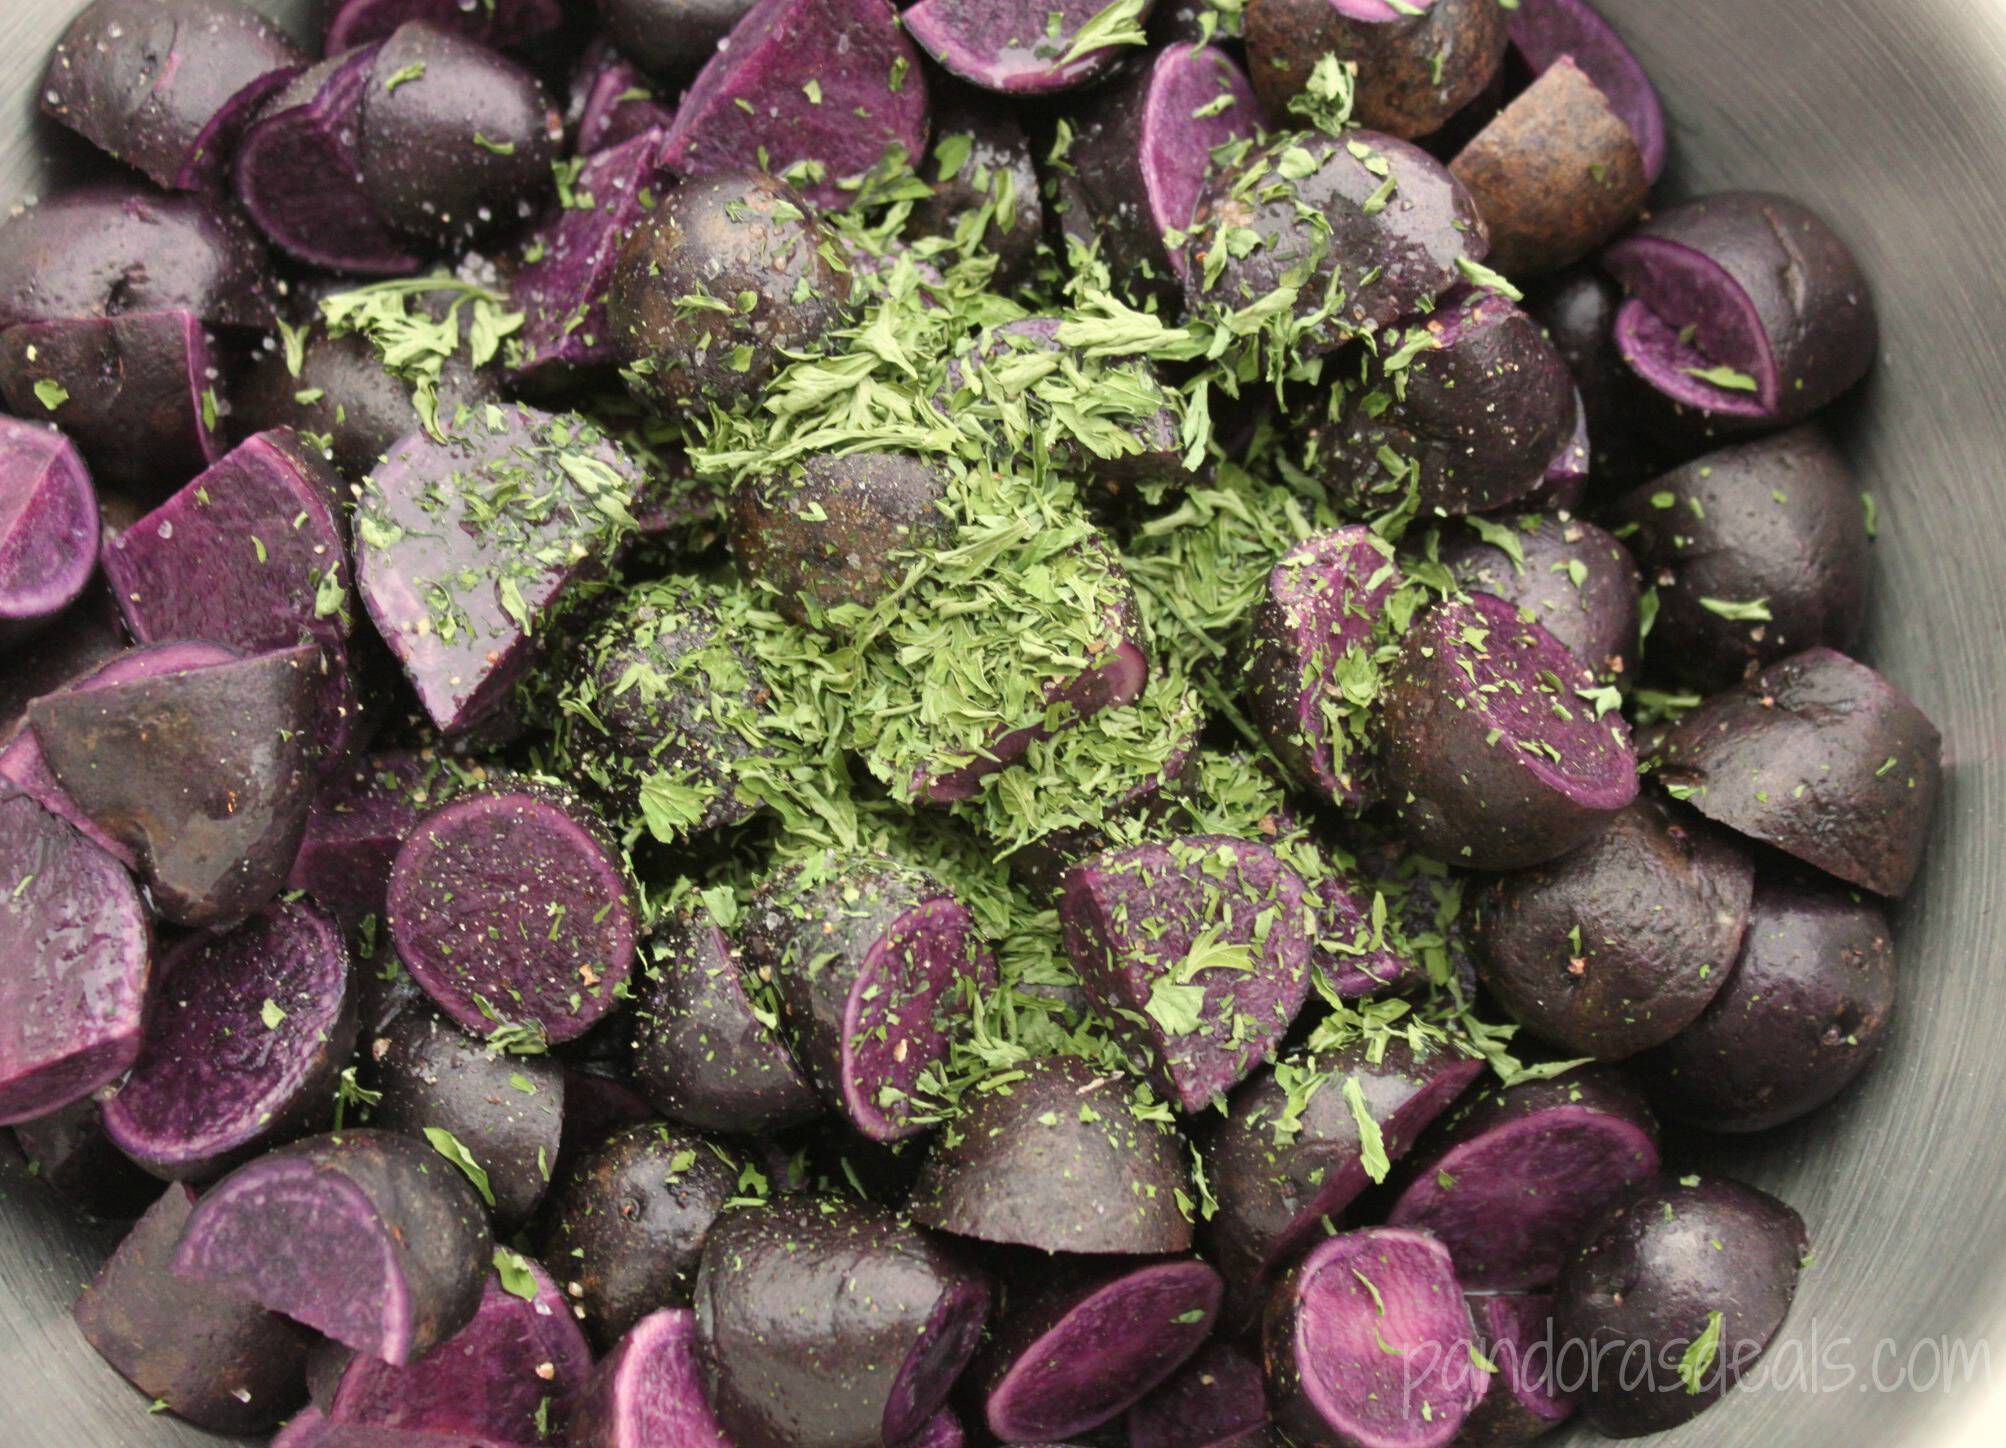 Want a fun side dish that's super easy to make? Try this Purple Parsley Potatoes recipe. You can whip it up in no time and trust me, everyone loves purple!